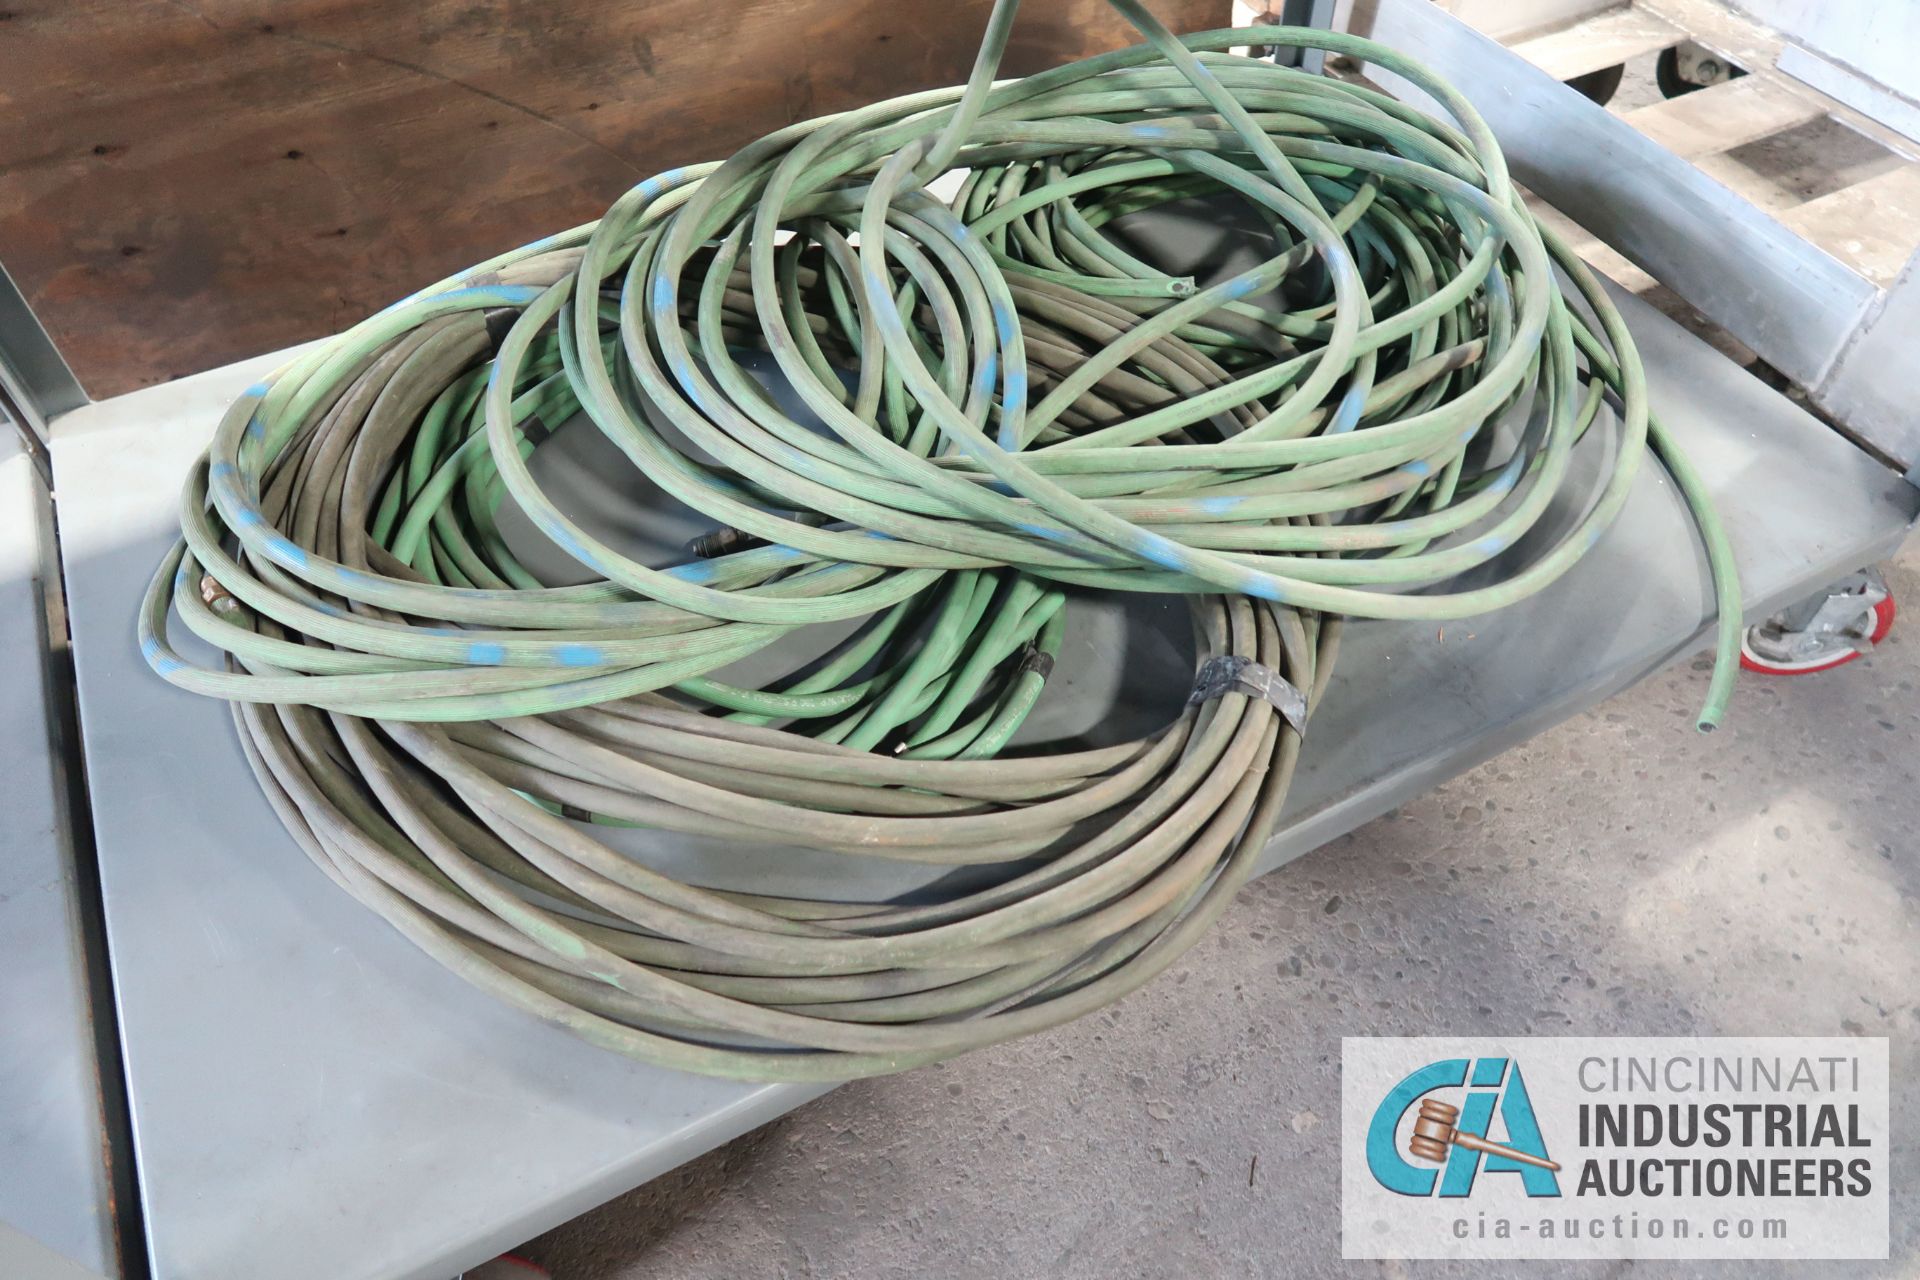 (LOT) MISCELLANEOUS USED GAS VINYL LINED HOSE **NO CART - CONTENTS ONLY** - Image 2 of 2